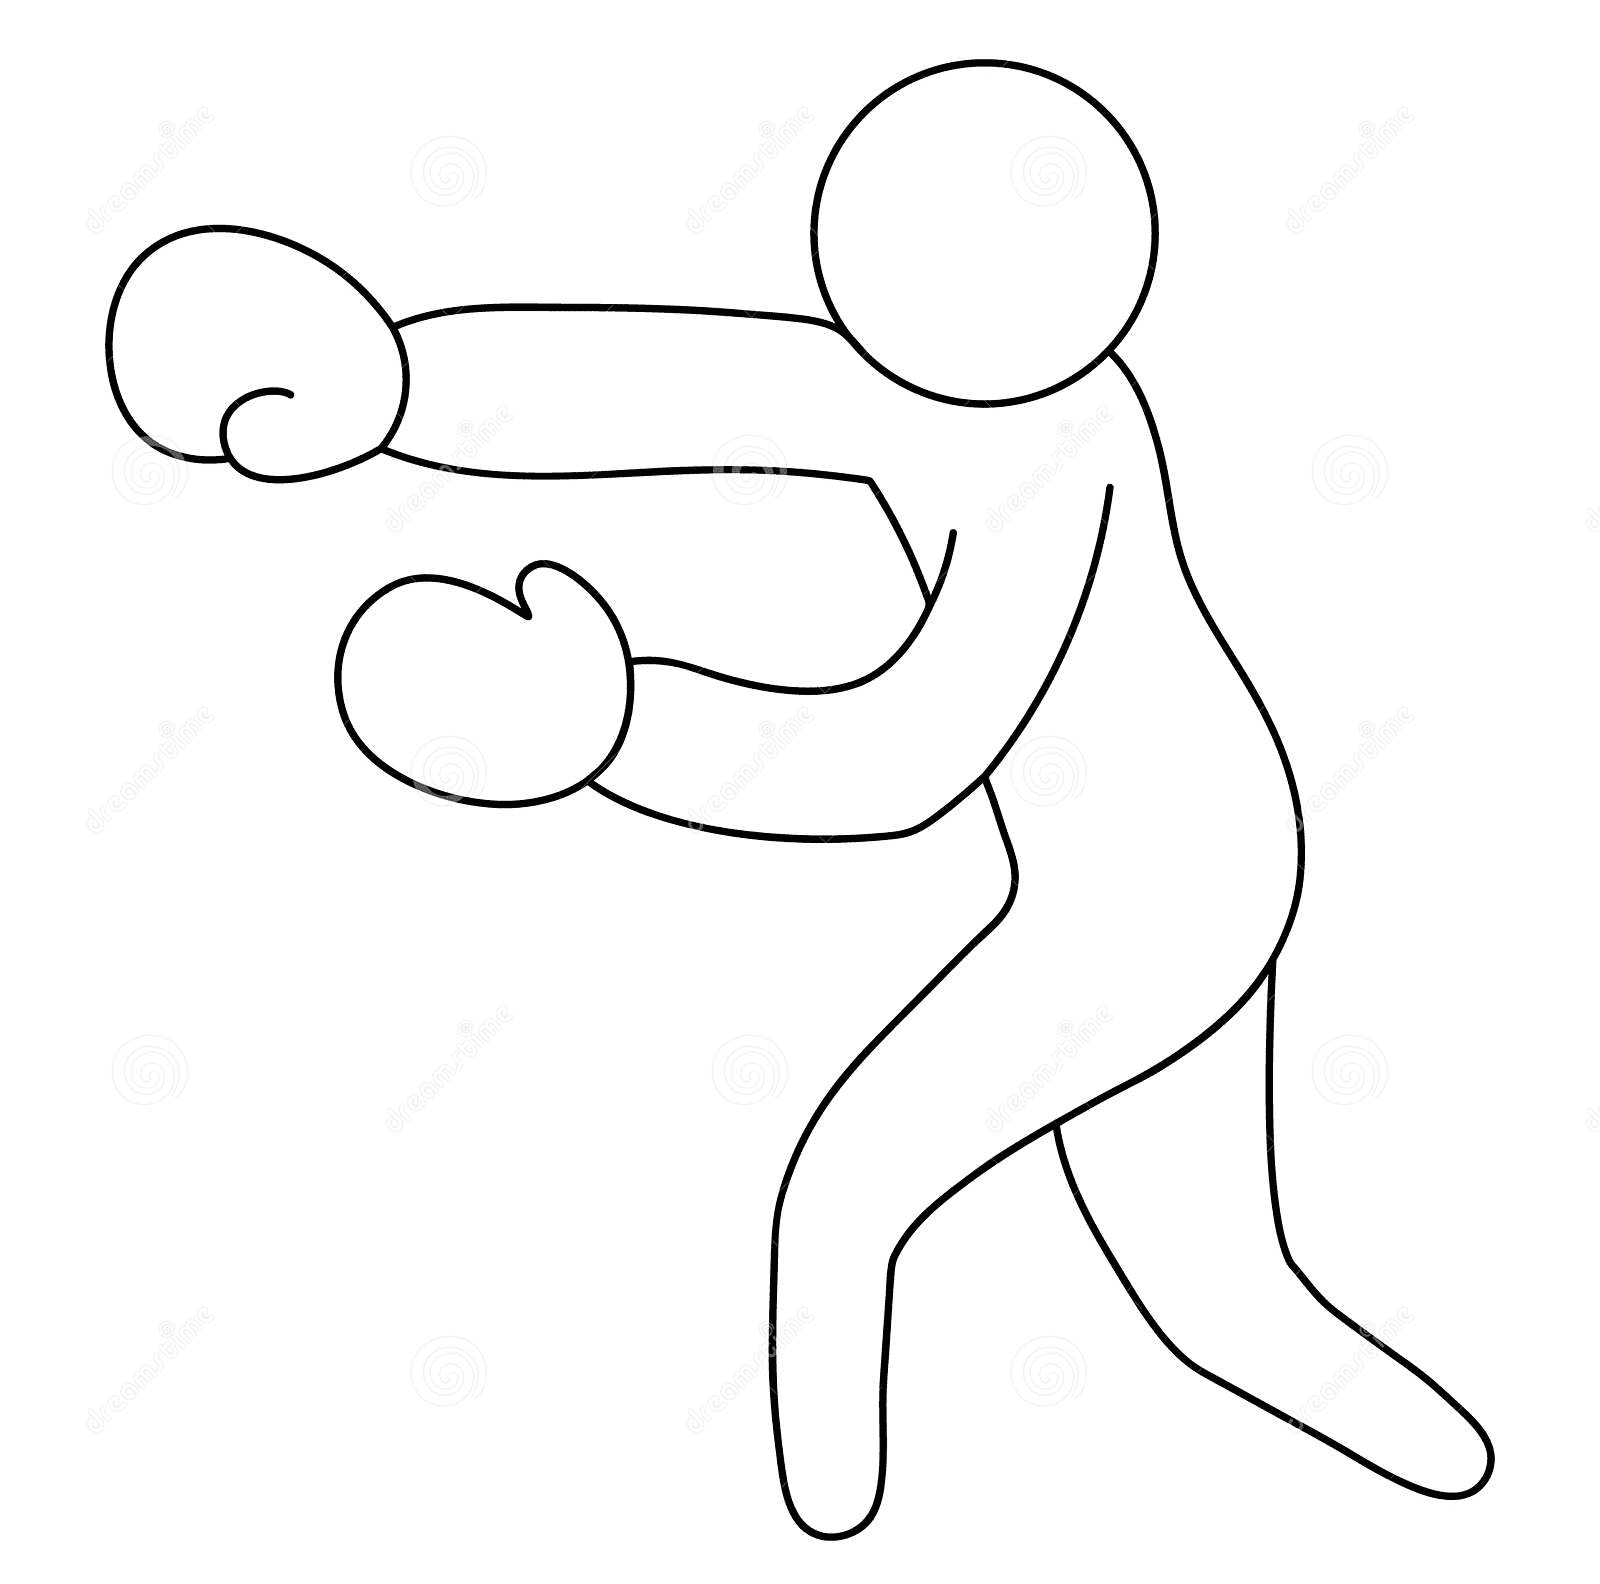 The Athlete In Boxing Gloves Is Boxing Image